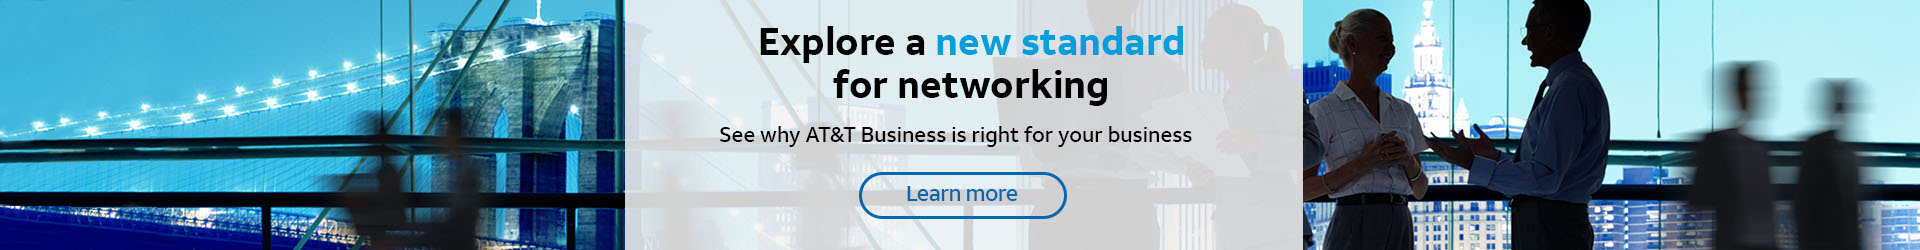 Explore a new standard for networking. See why AT&T Business is right for your business. Learn more.